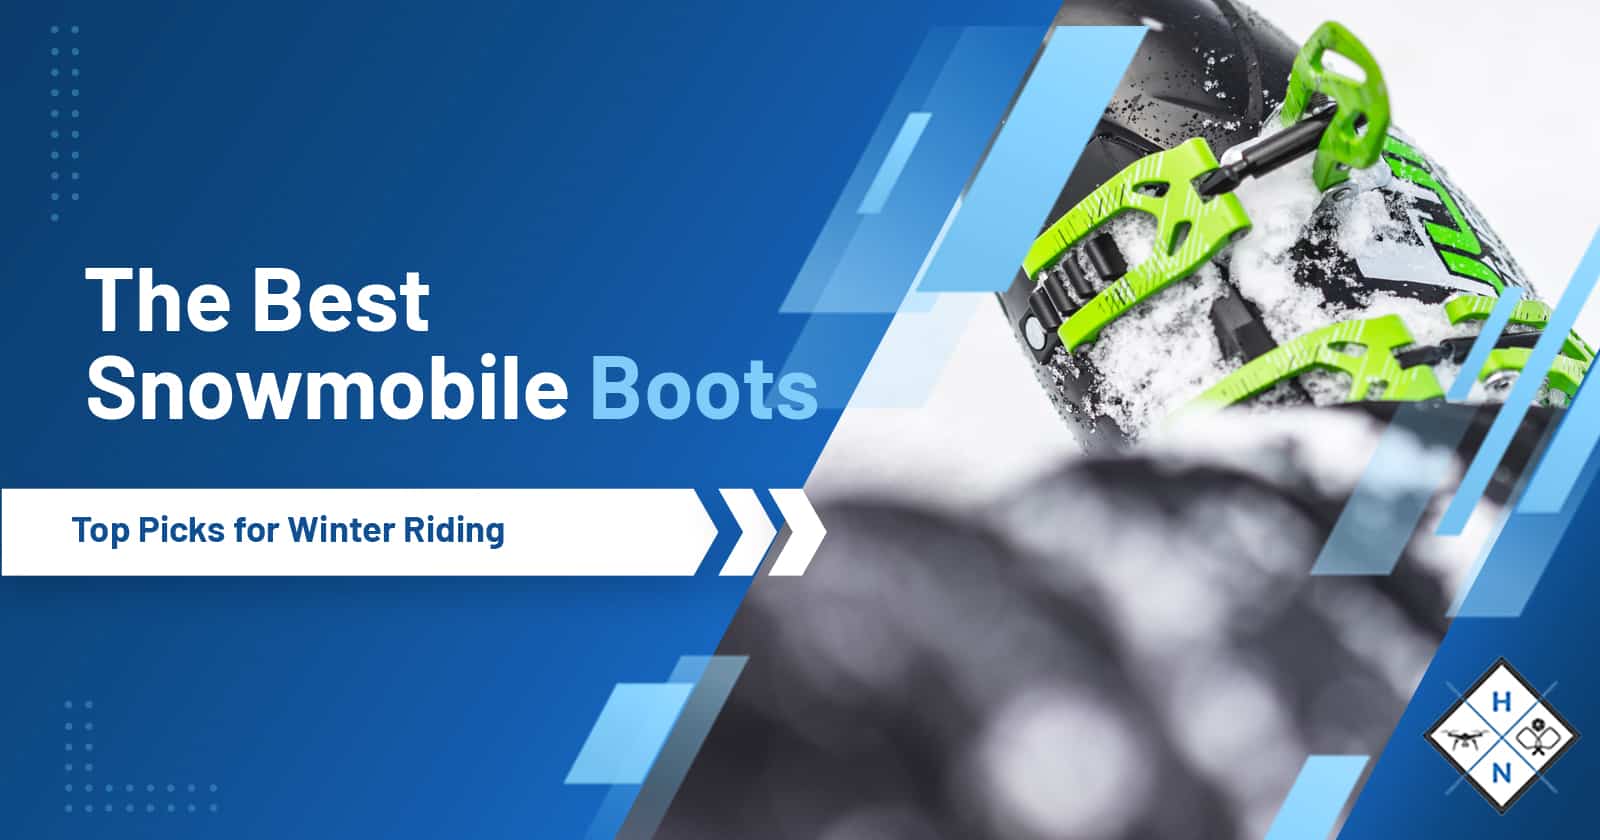 The Best Snowmobile Boots &#8211; Top Picks for Winter Riding